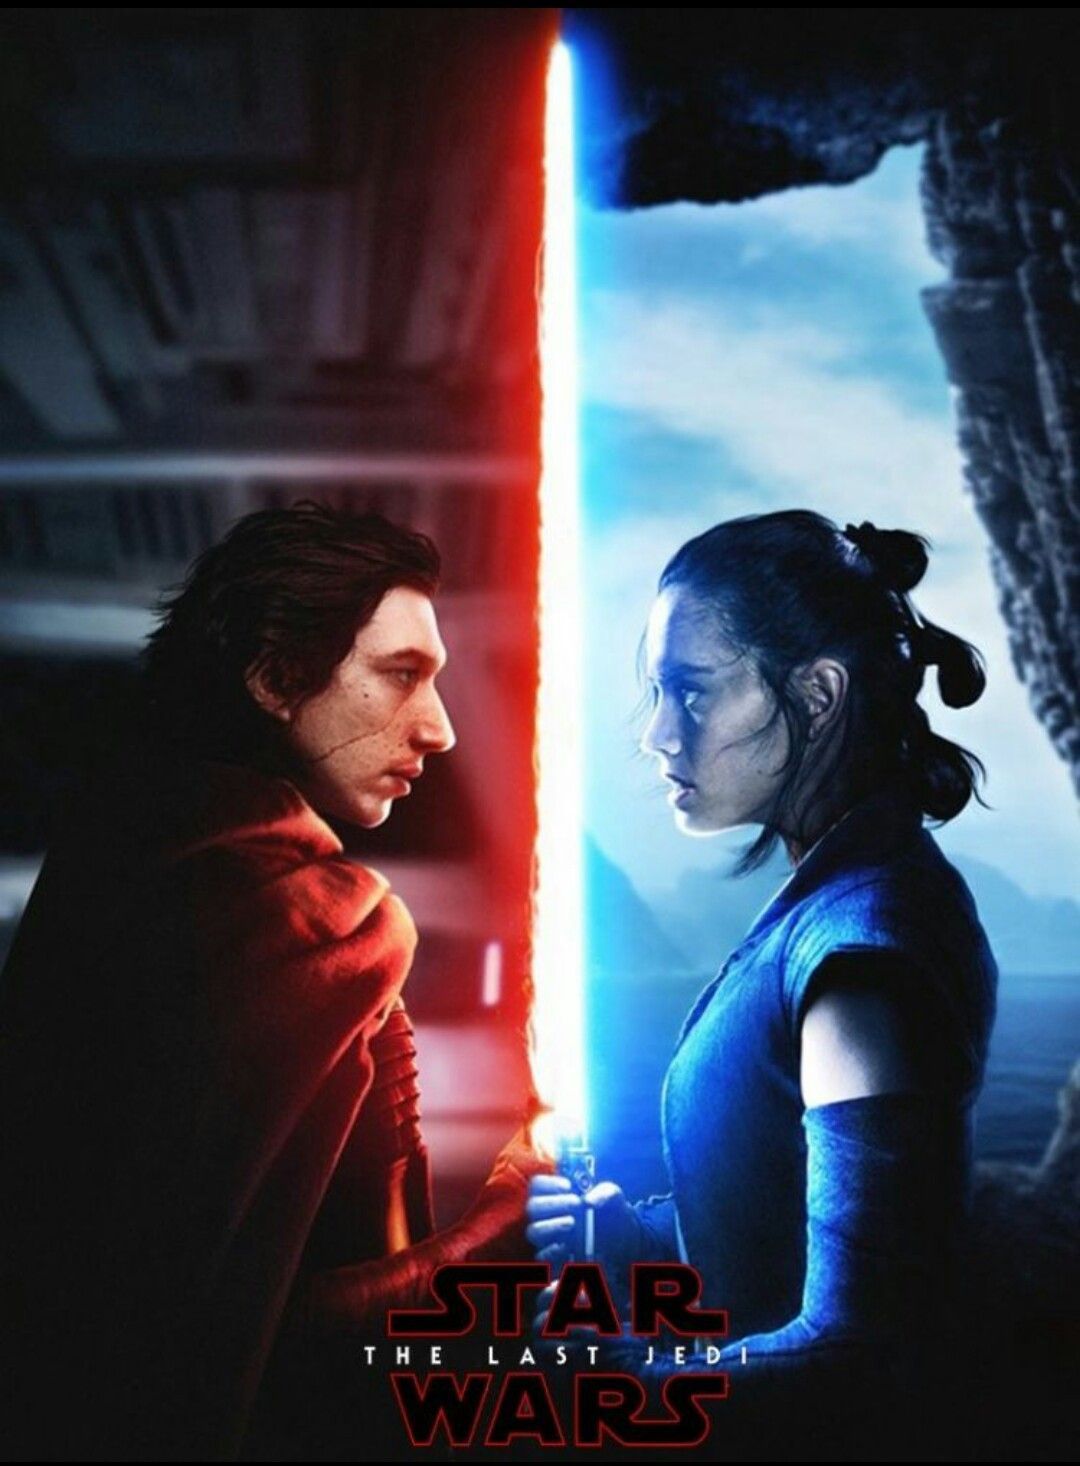 Kylo Ren And Rey In Star Wars The Rise Of Skywalker Wallpapers